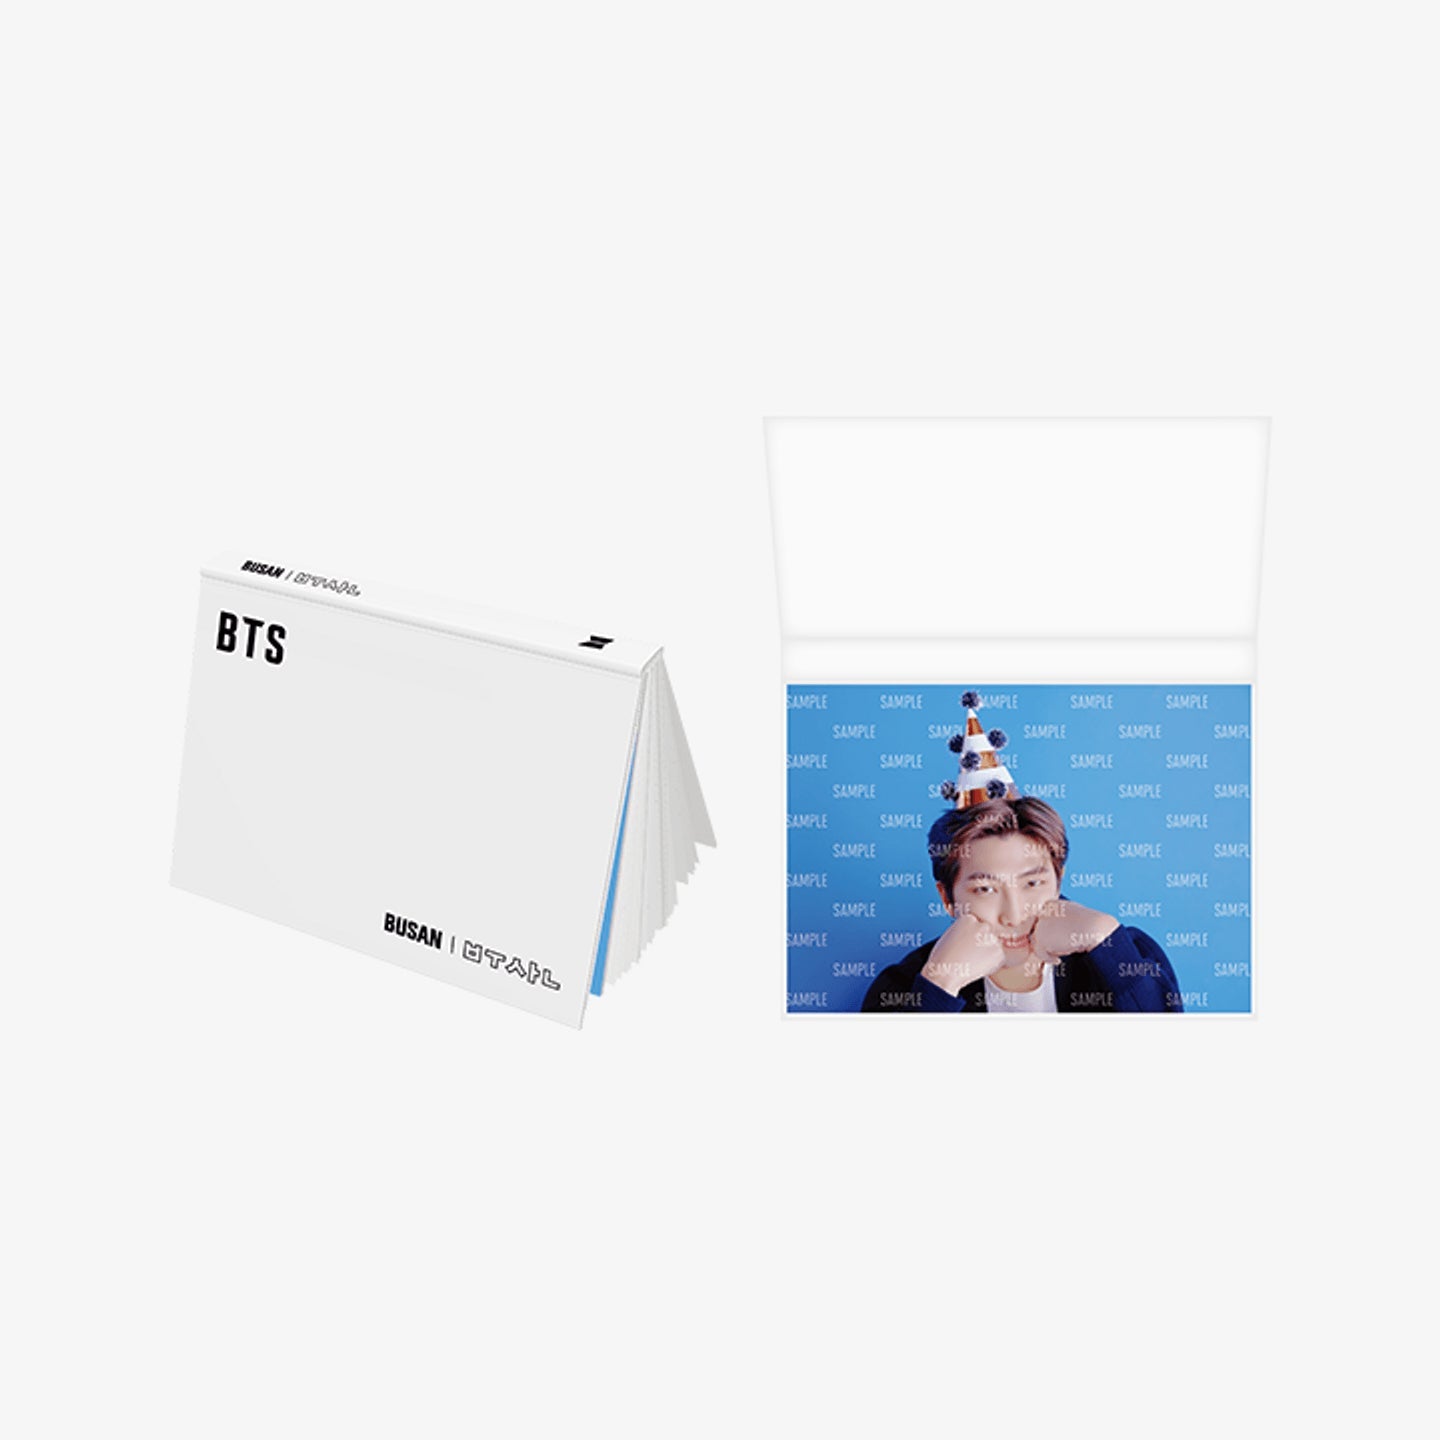 BTS - Yet To Come in BUSAN OFFICIAL MD 'Photo Book'